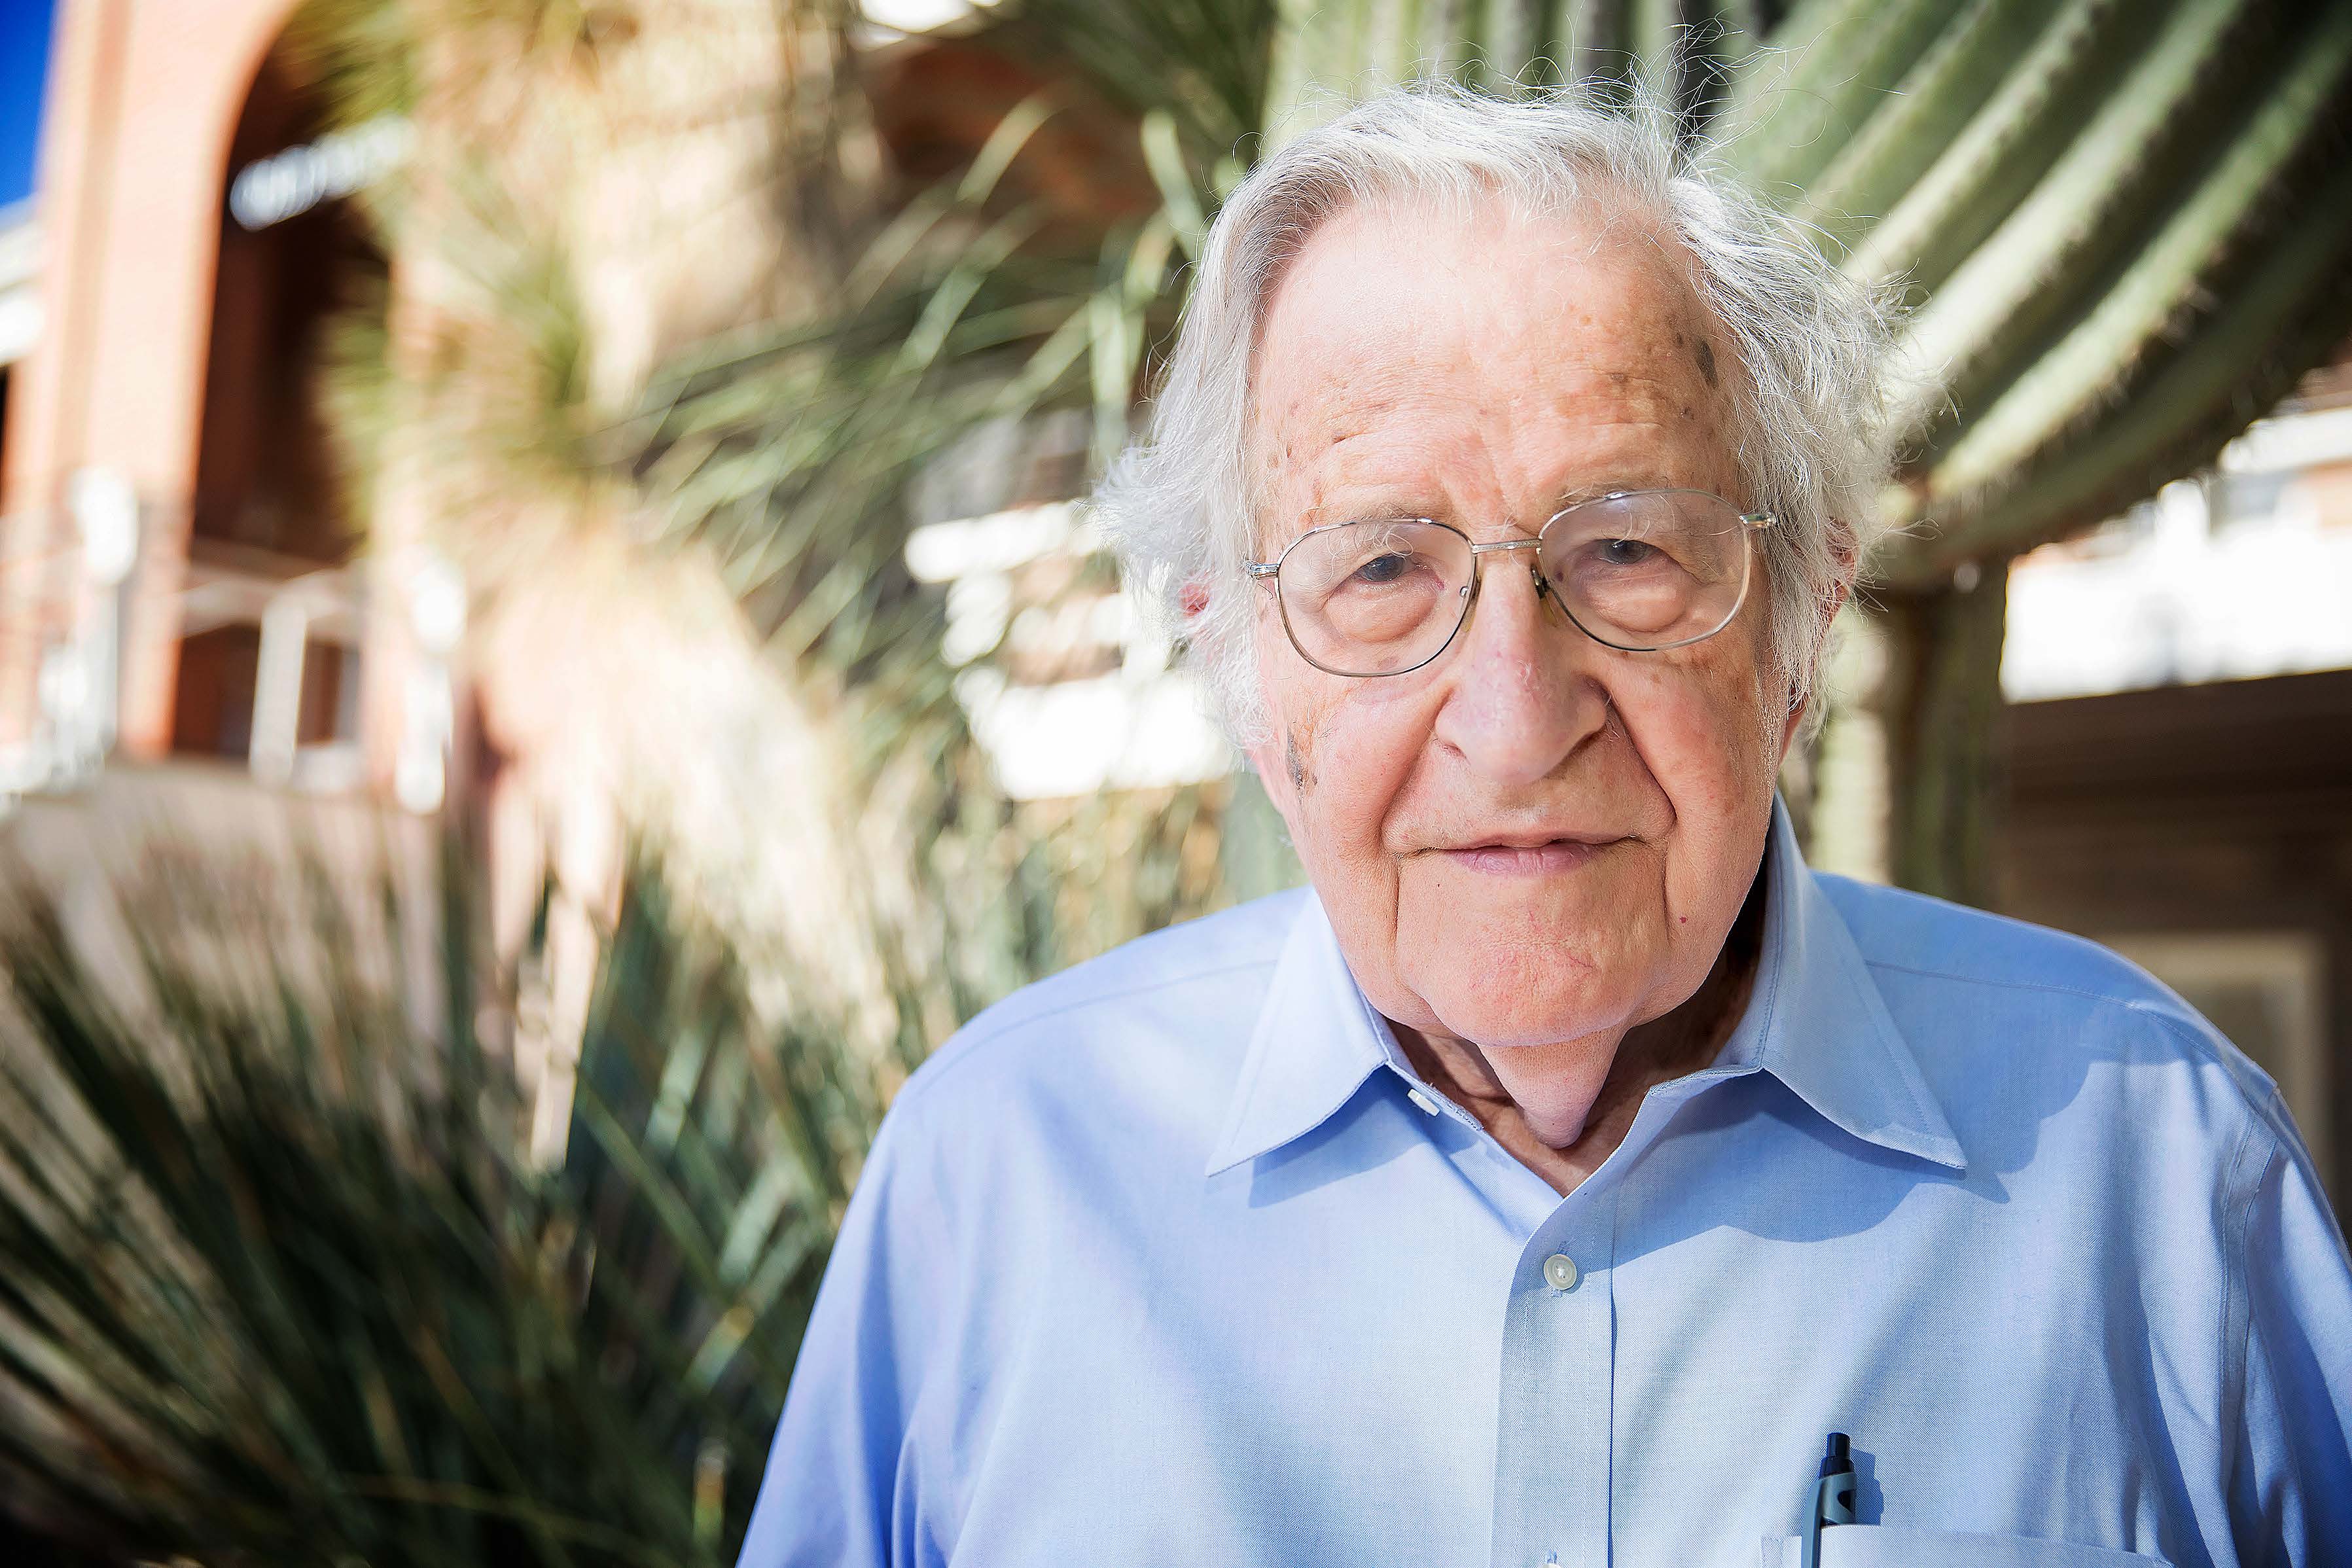 Noam Chomsky, one of the most cited scholars in modern history, to give  free lecture at Joel D. Valdez Main Library | Pima County Public Library